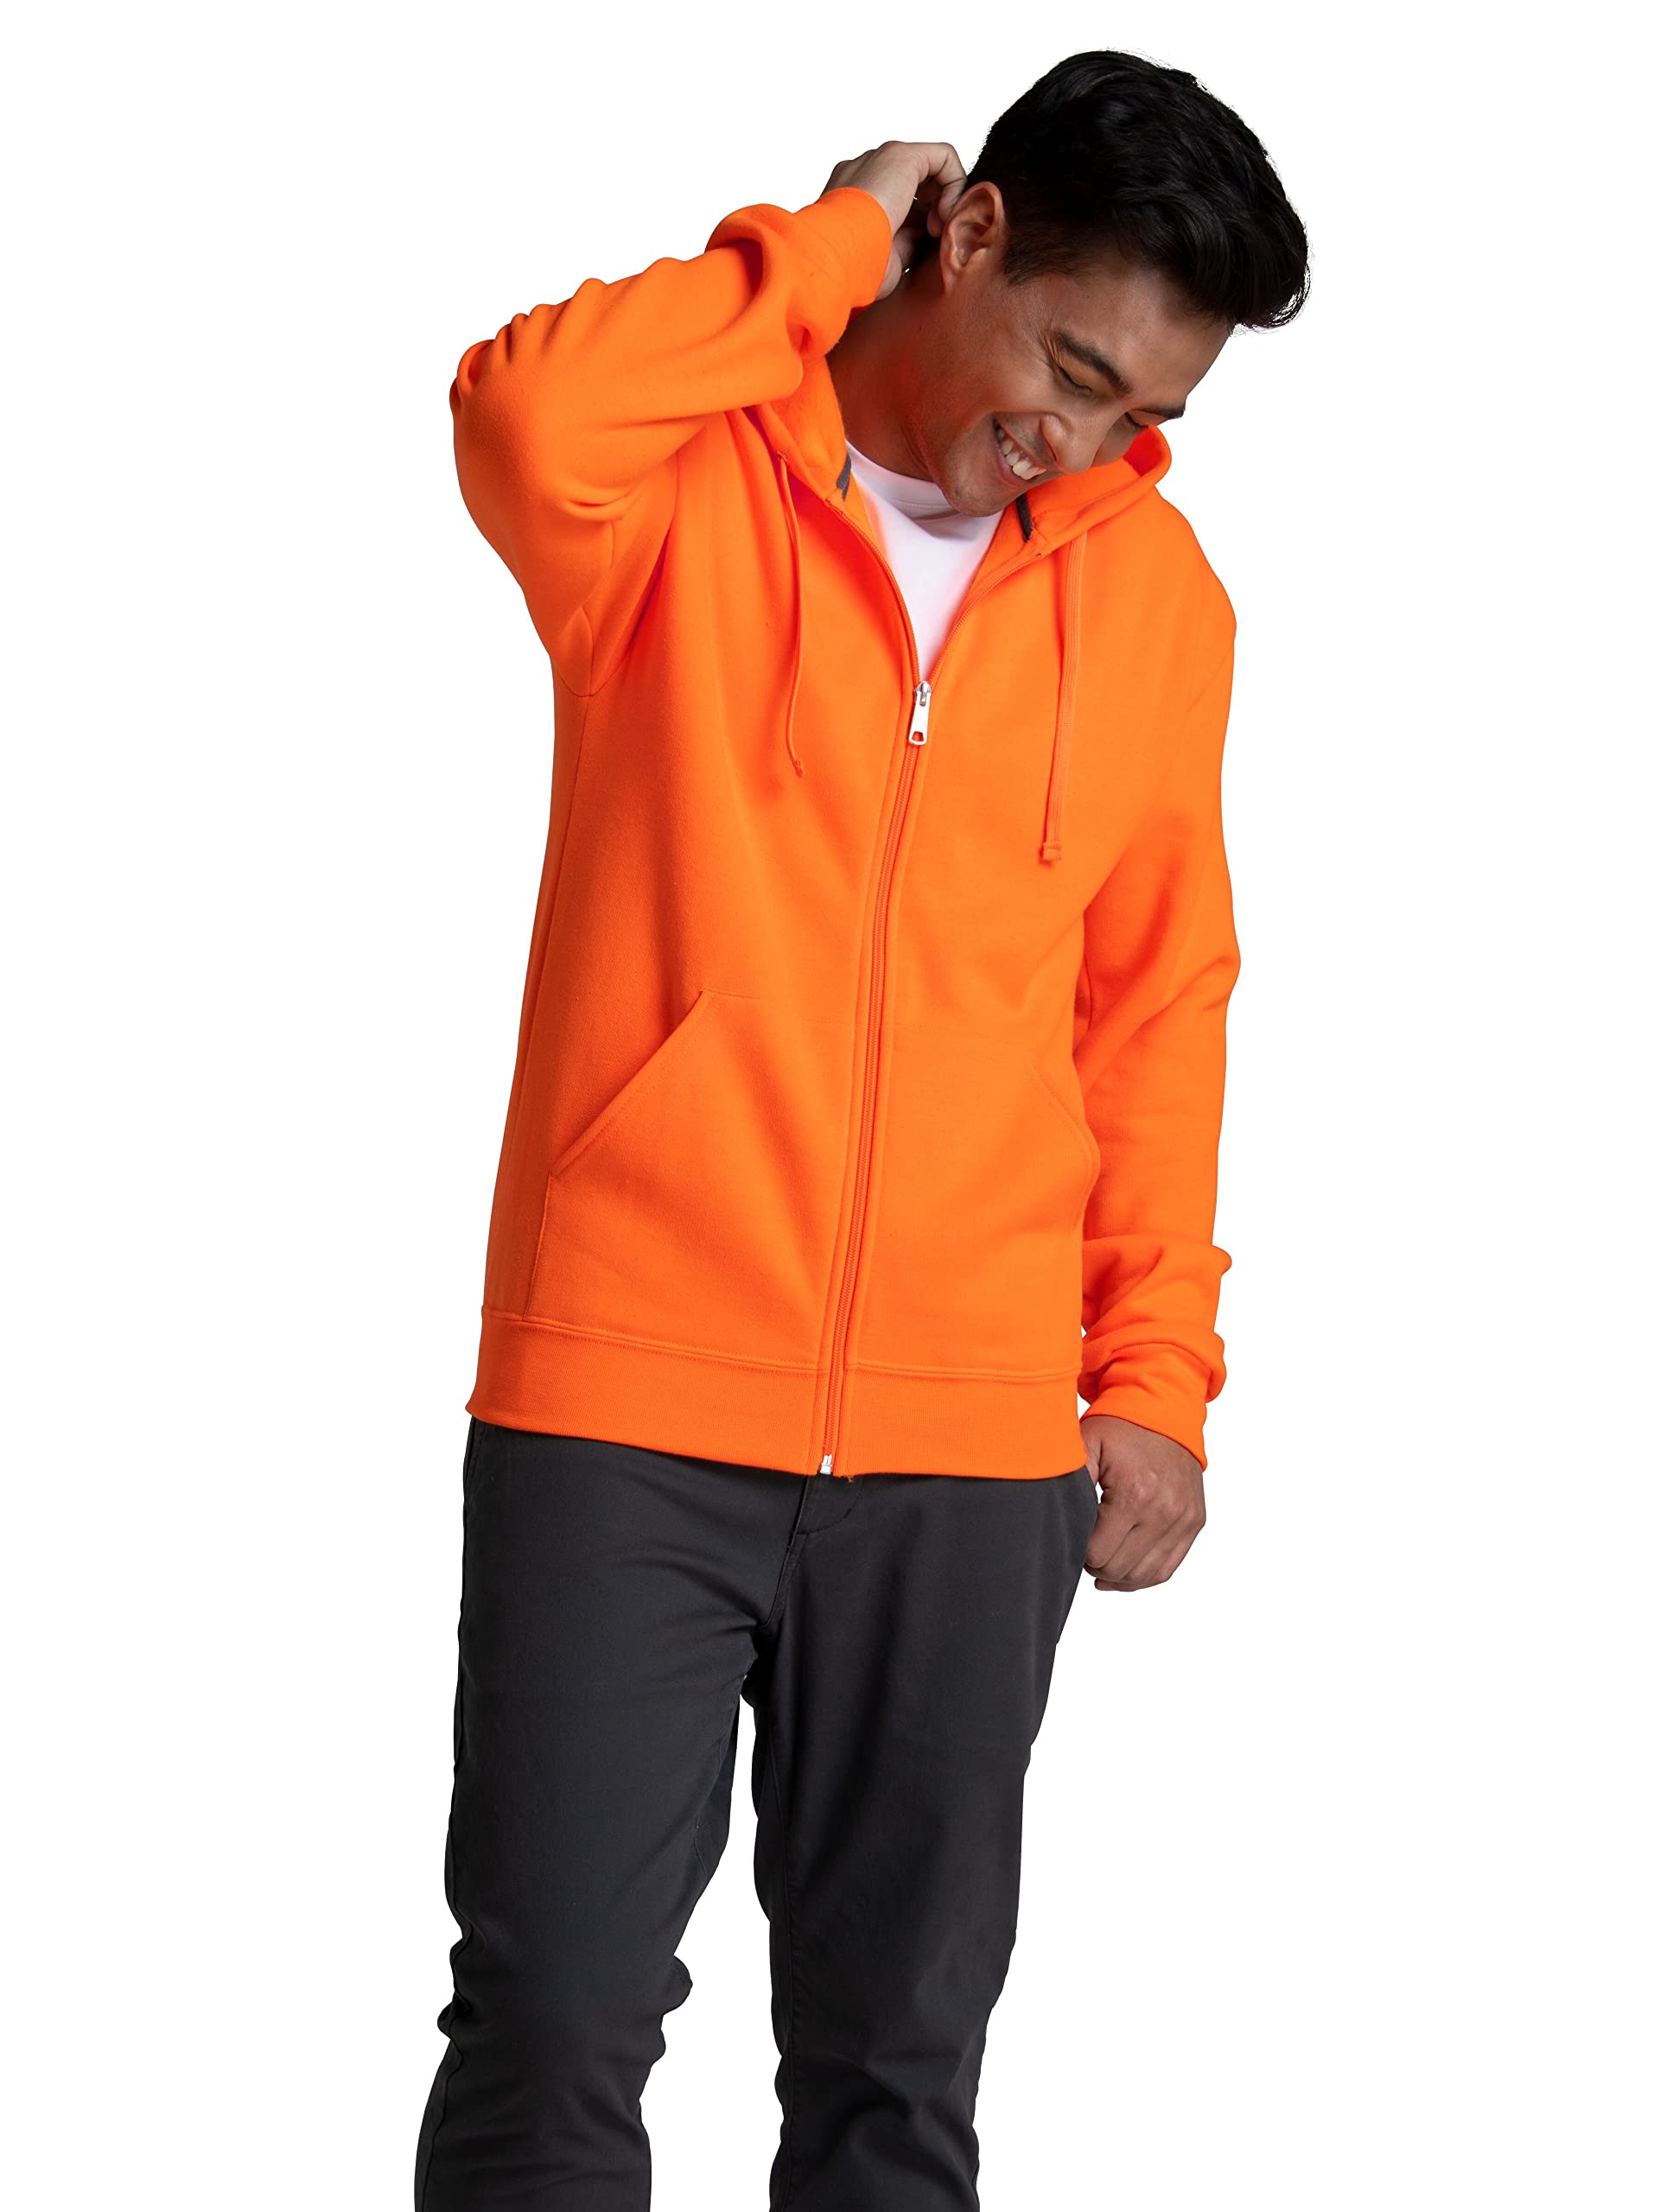 Fruit of the Loom Eversoft Fleece Hoodies, Pullover & Full Zip, Moisture Wicking & Breathable, Sizes S-4x